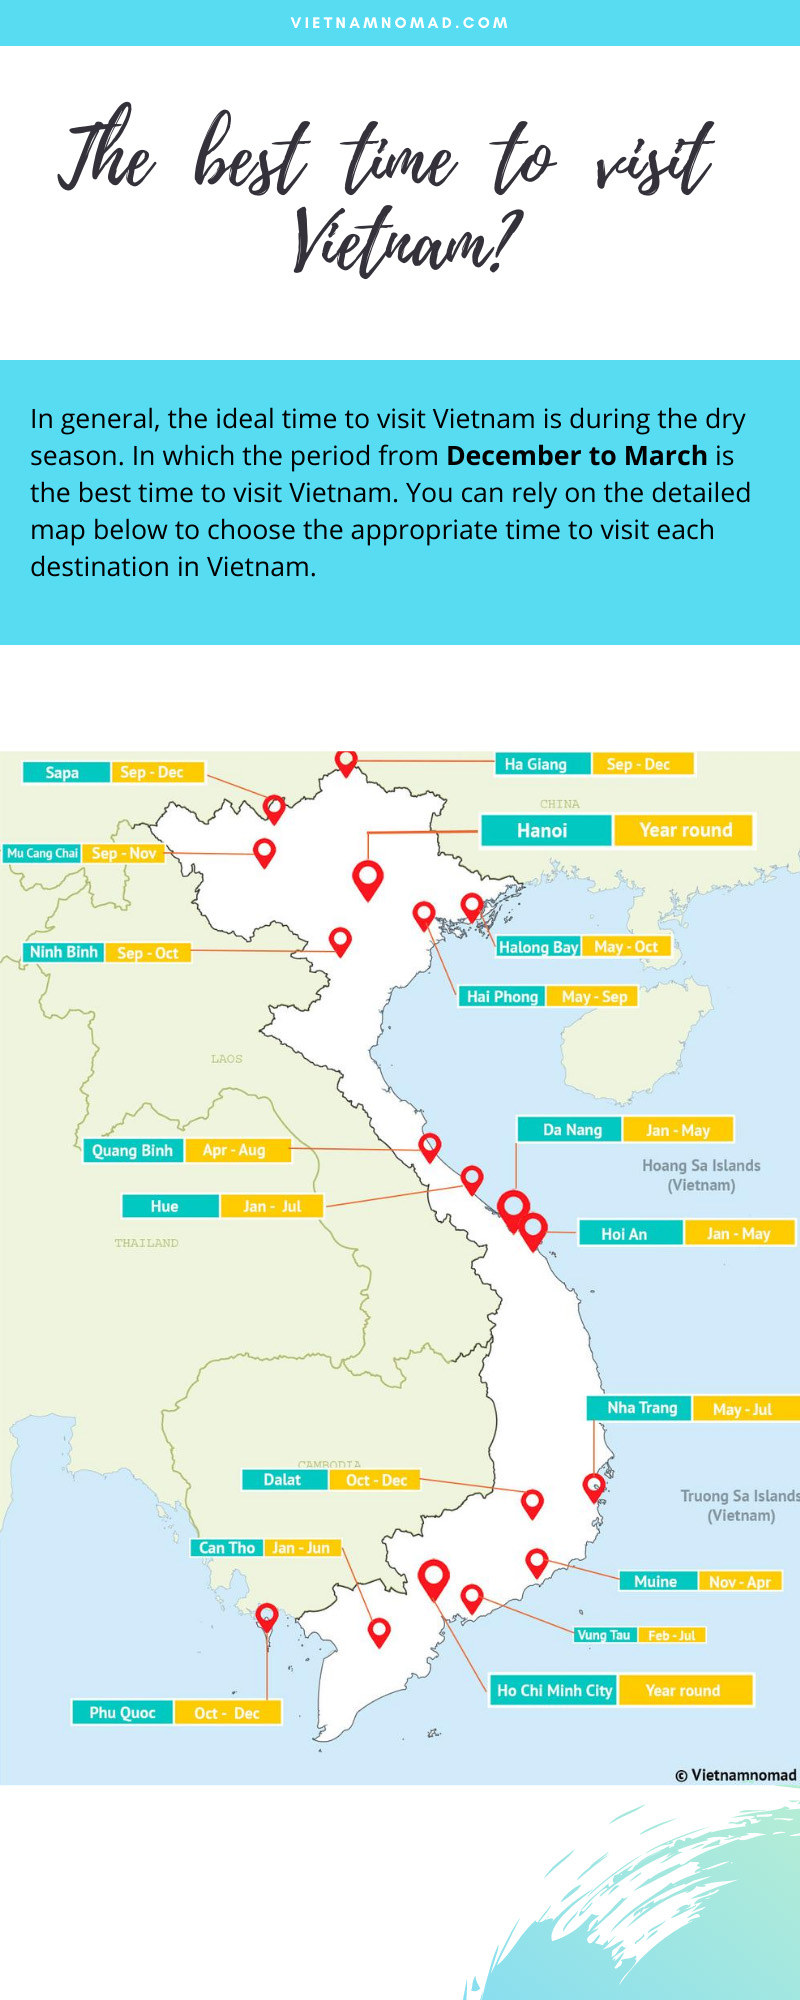 Vietnam weather infographic - The best time to visit Vietnam